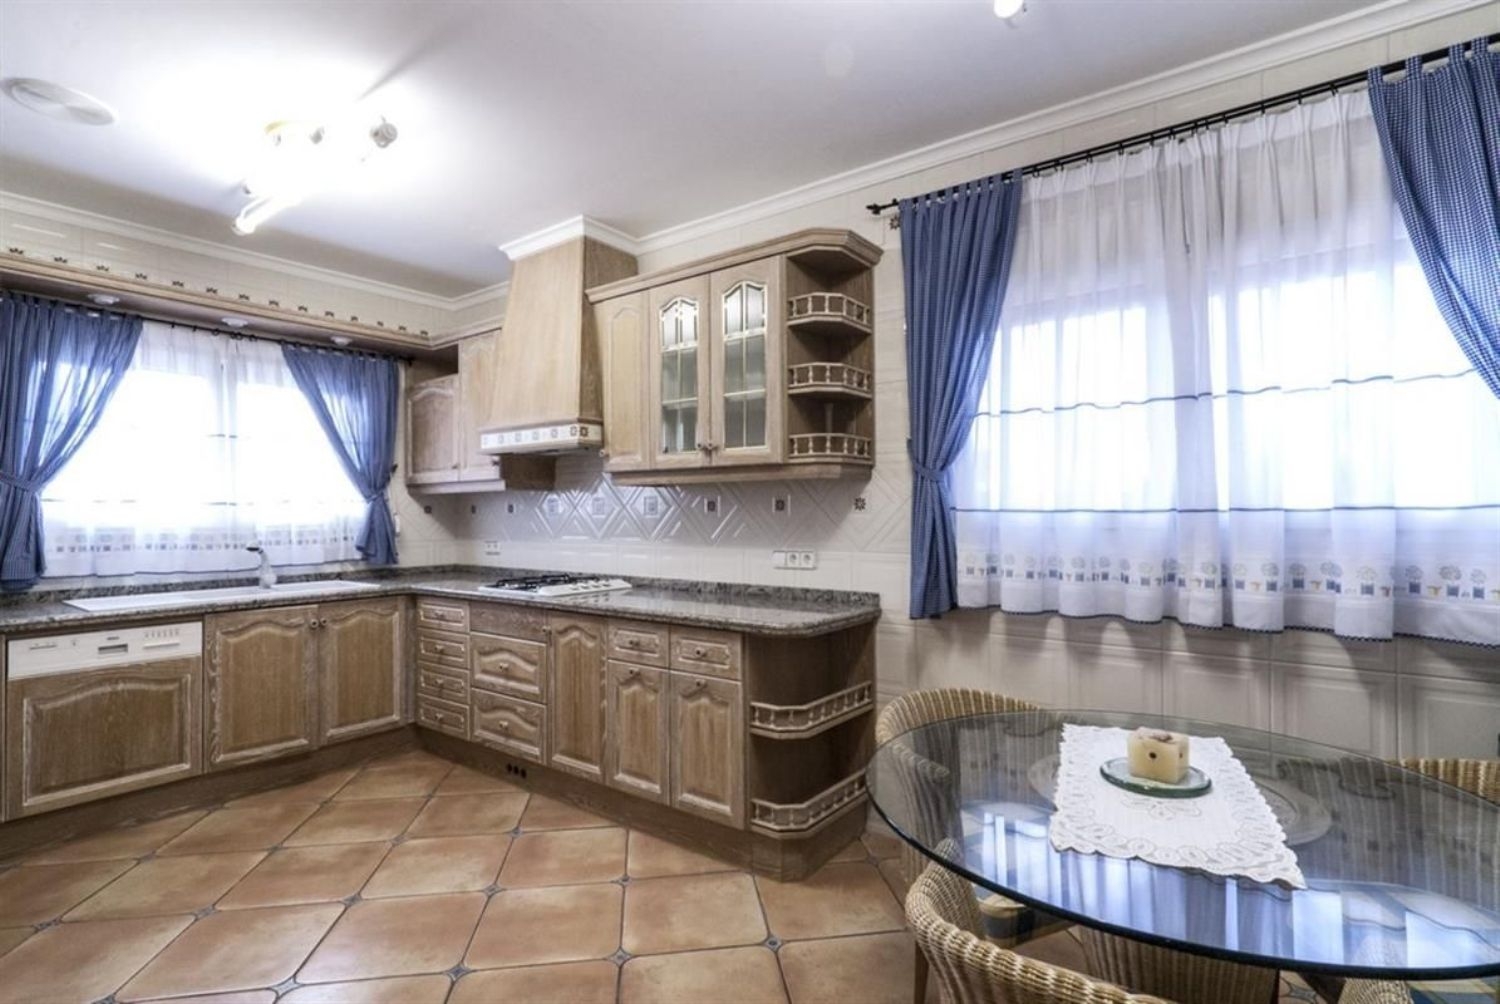 For Sale. House | Villa in Teulada